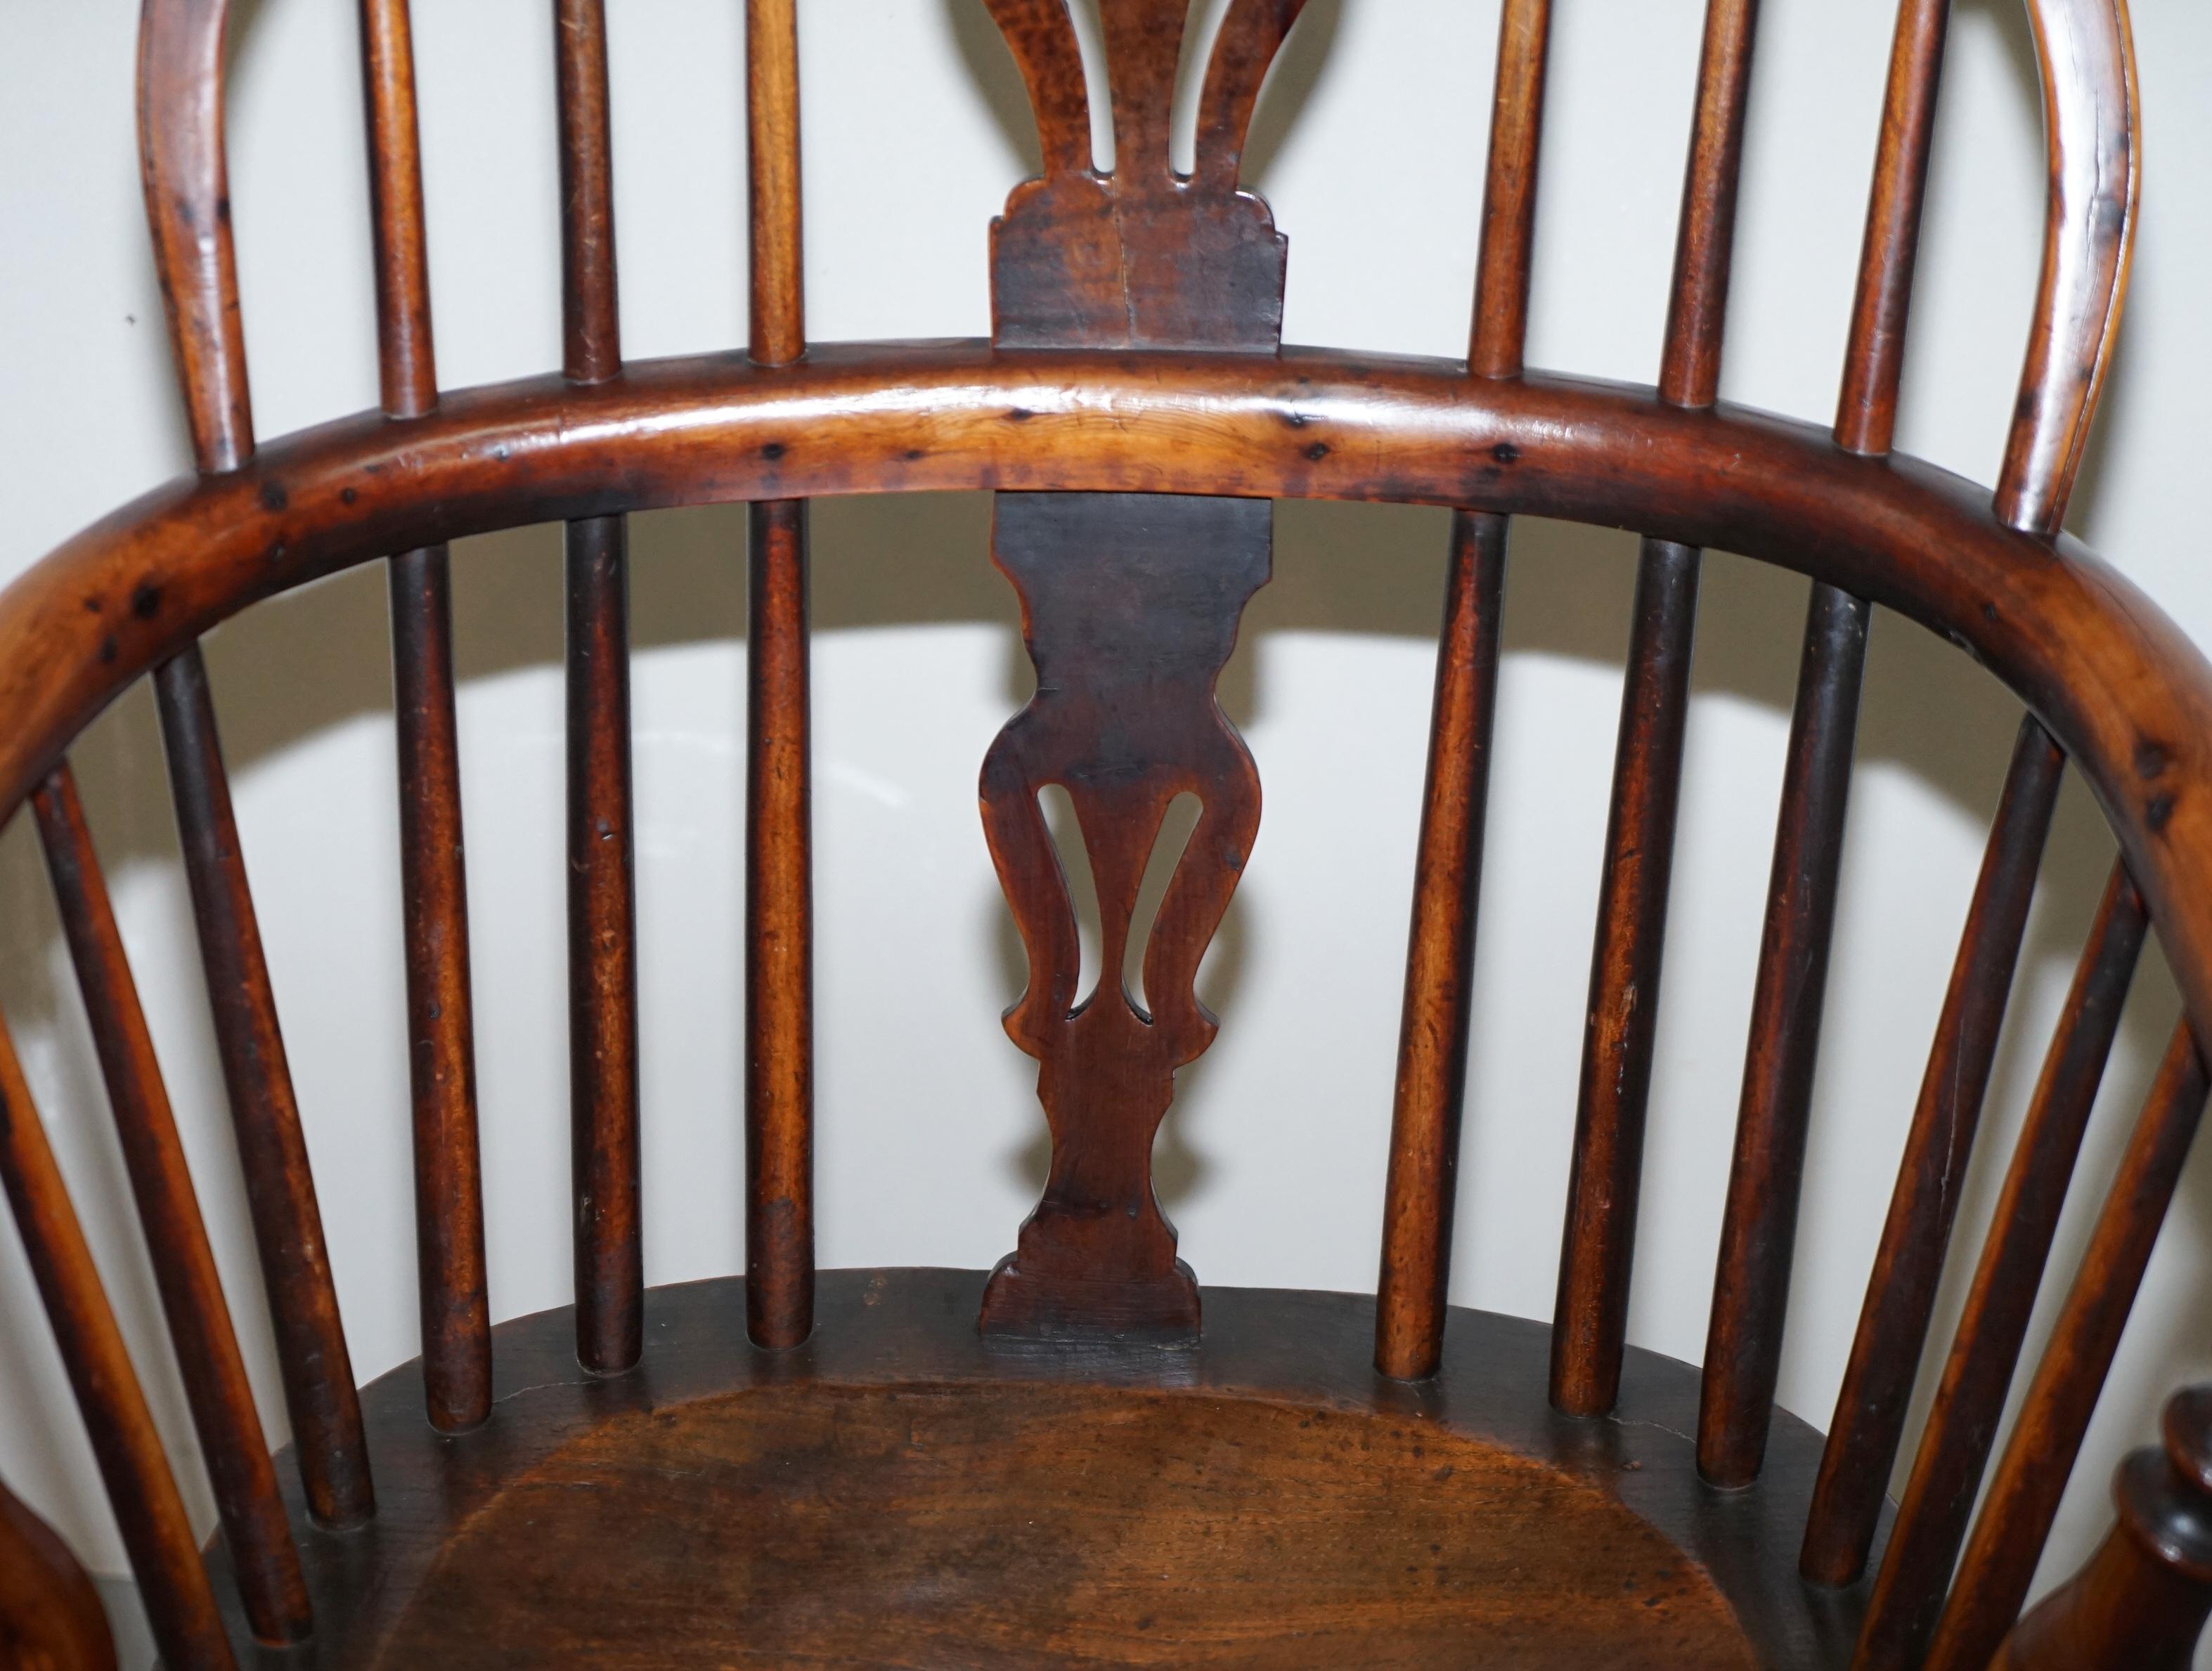 Mid-19th Century 1 of 6 Burr Yew Wood and Elm Windsor Armchairs circa 1860 English Country House